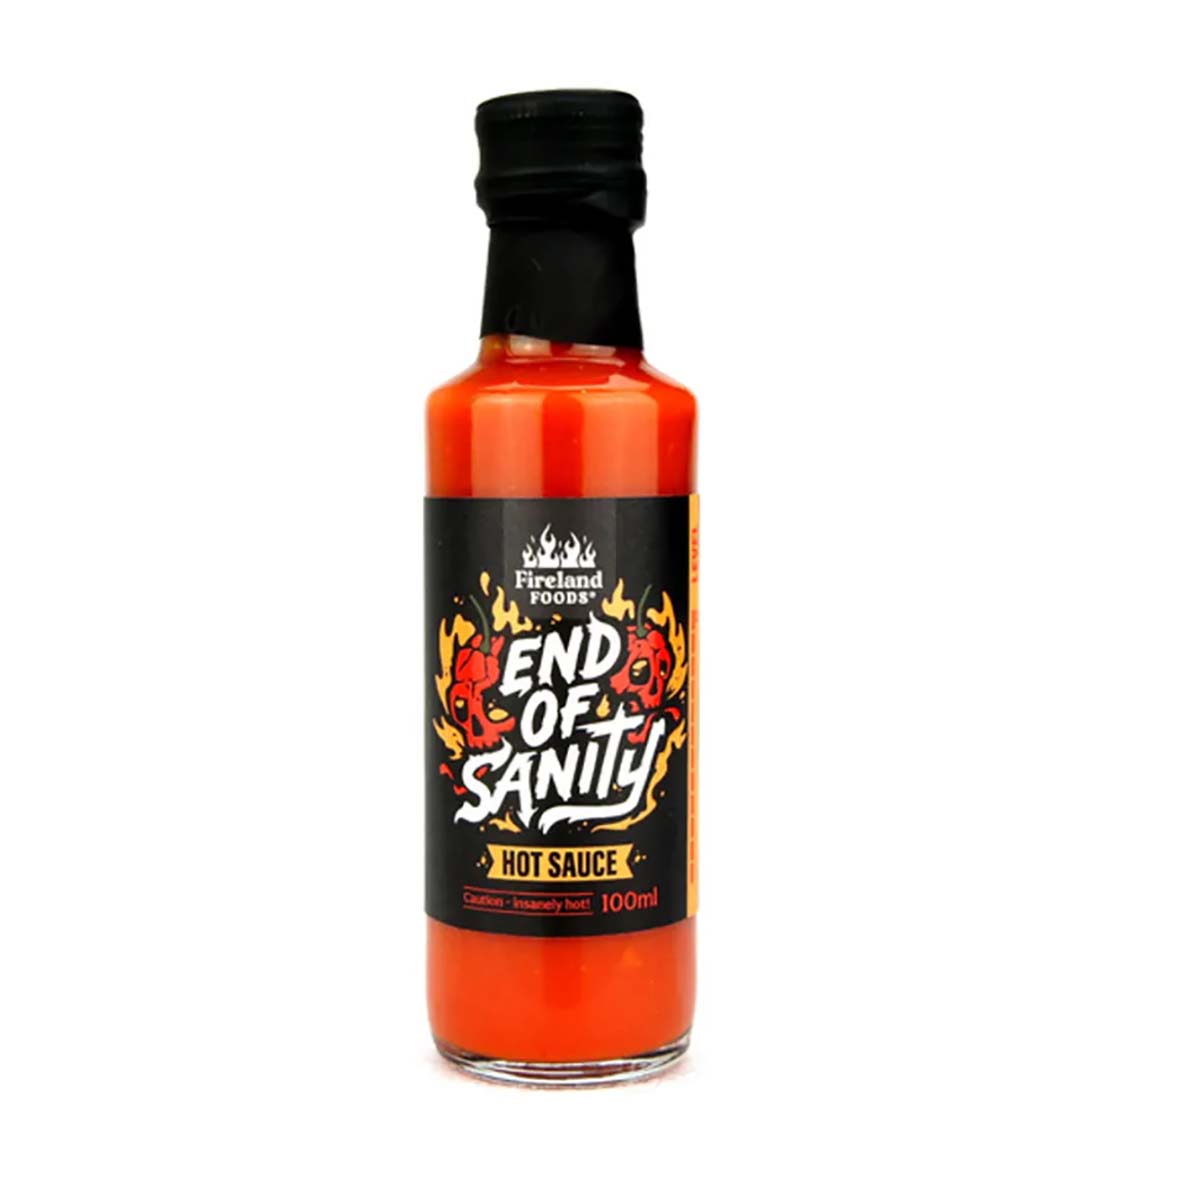 Fireland Foods | End of Sanity Hot-Sauce | 100ml